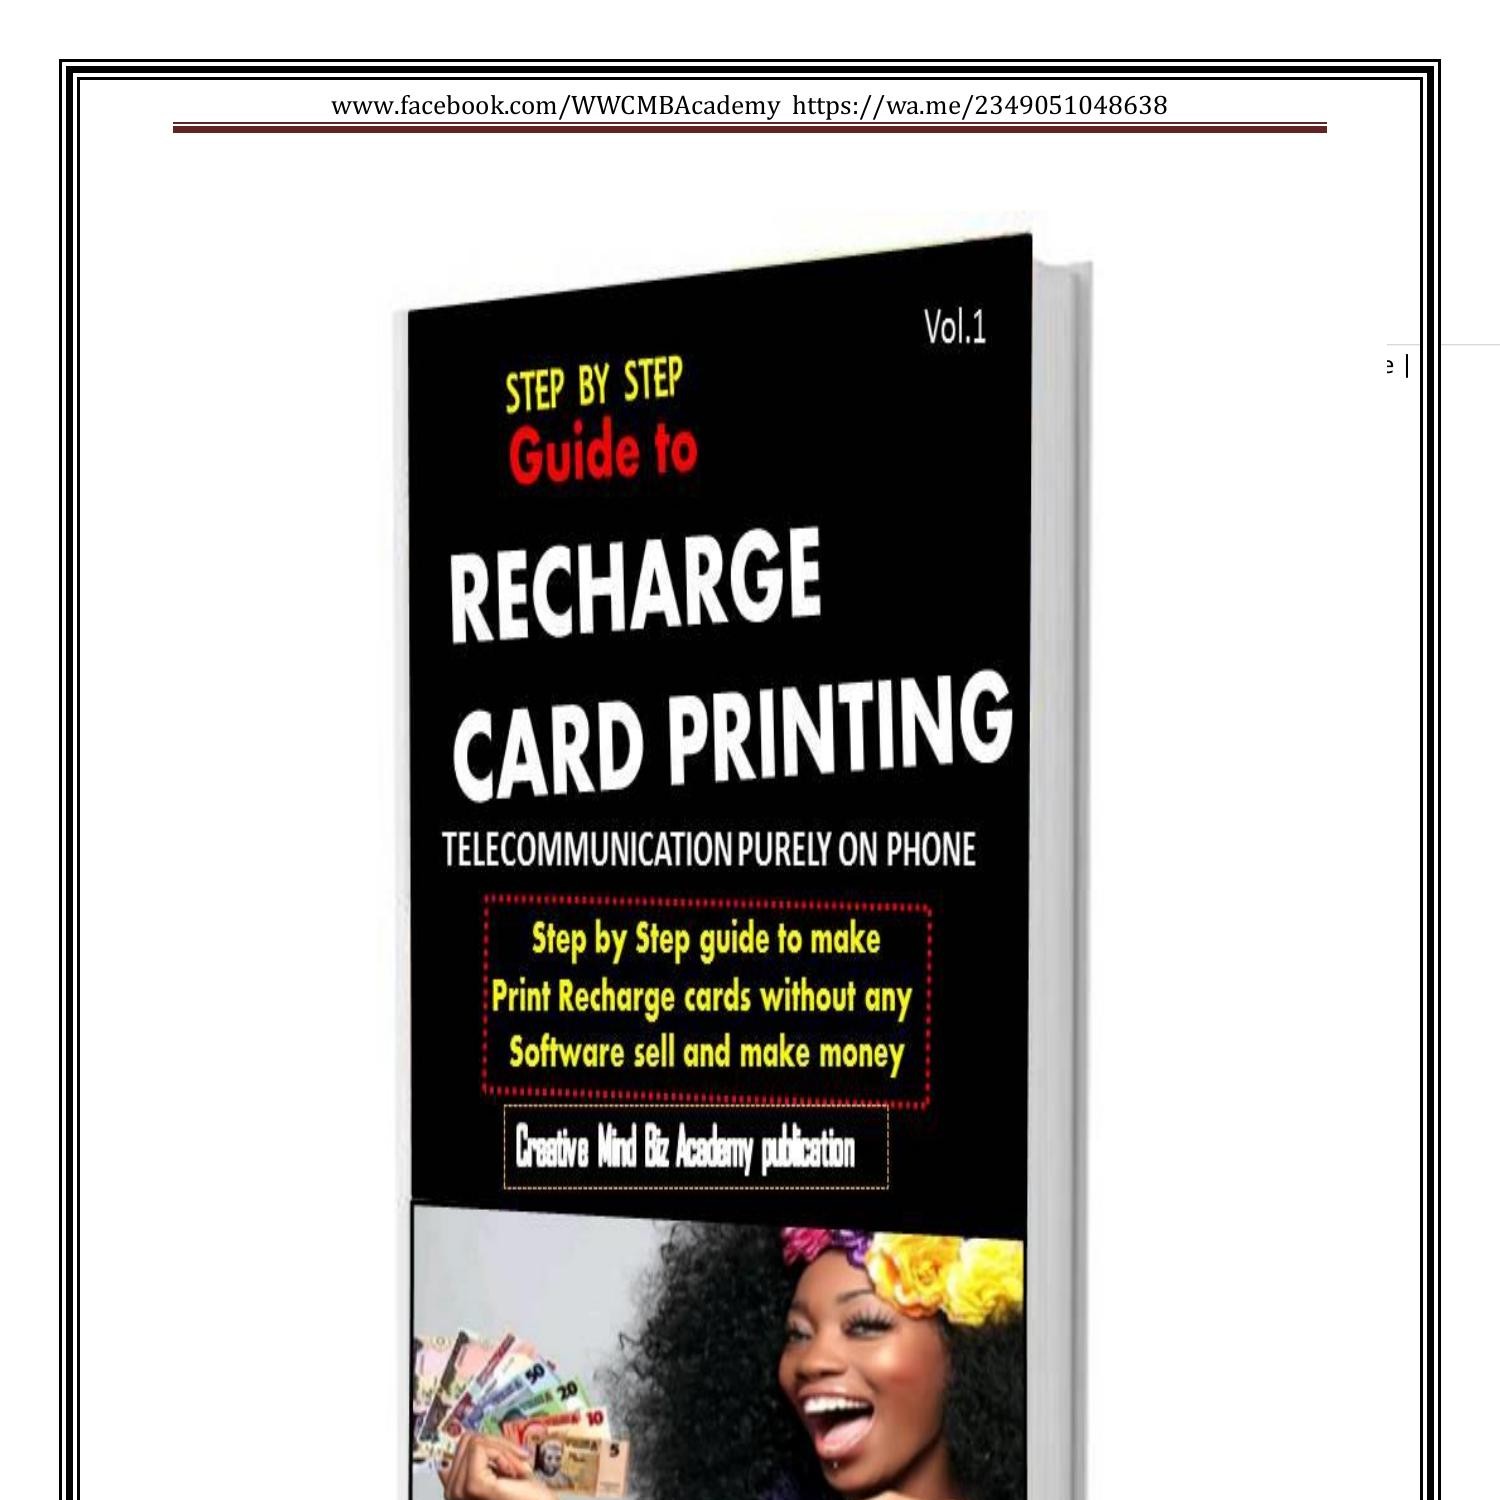 business plan on recharge card printing